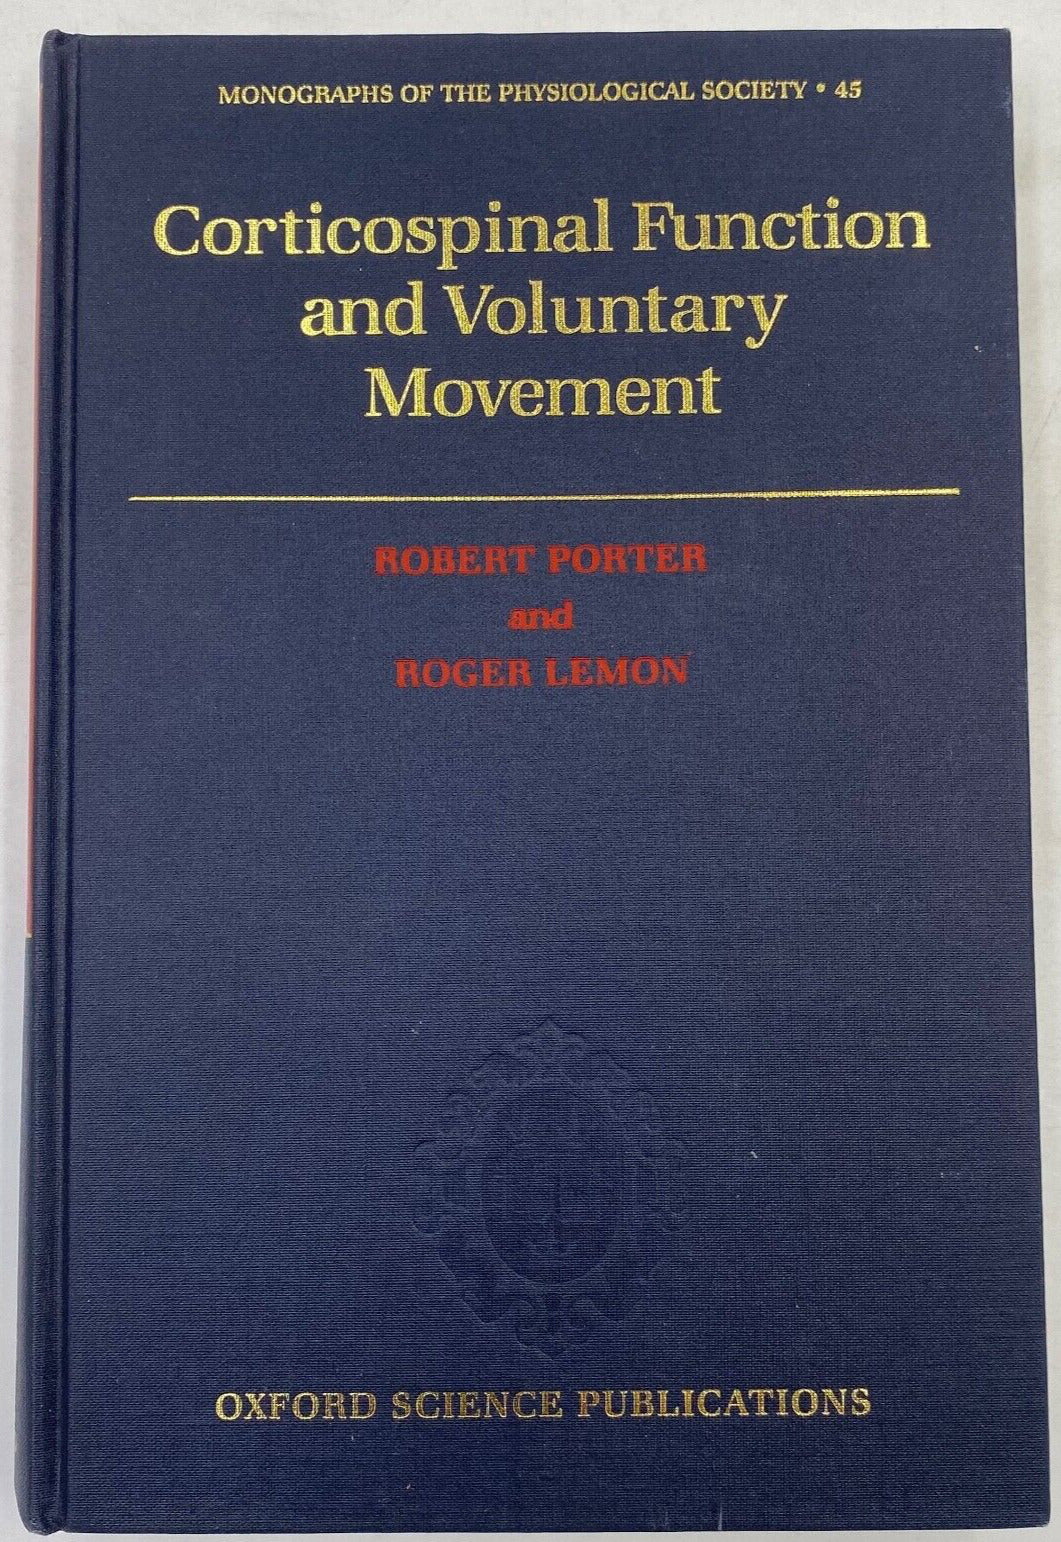 Corticospinal Function and Voluntary Movement -Robert Porter/Roger Lemon 1993 HC